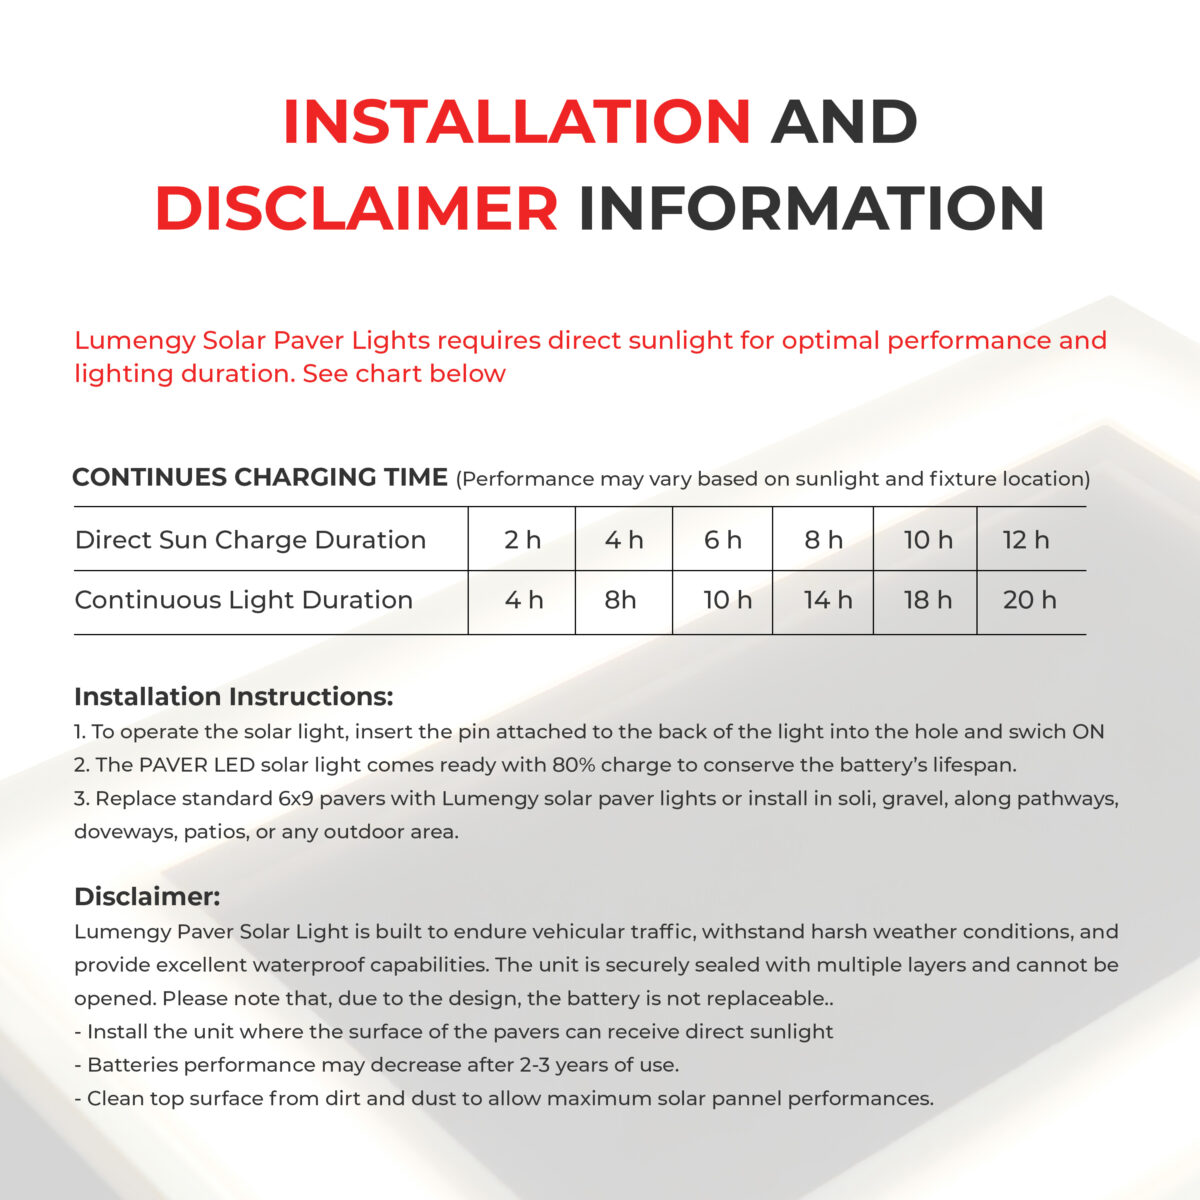 Solar Paver Lights Installation and Disclaimer